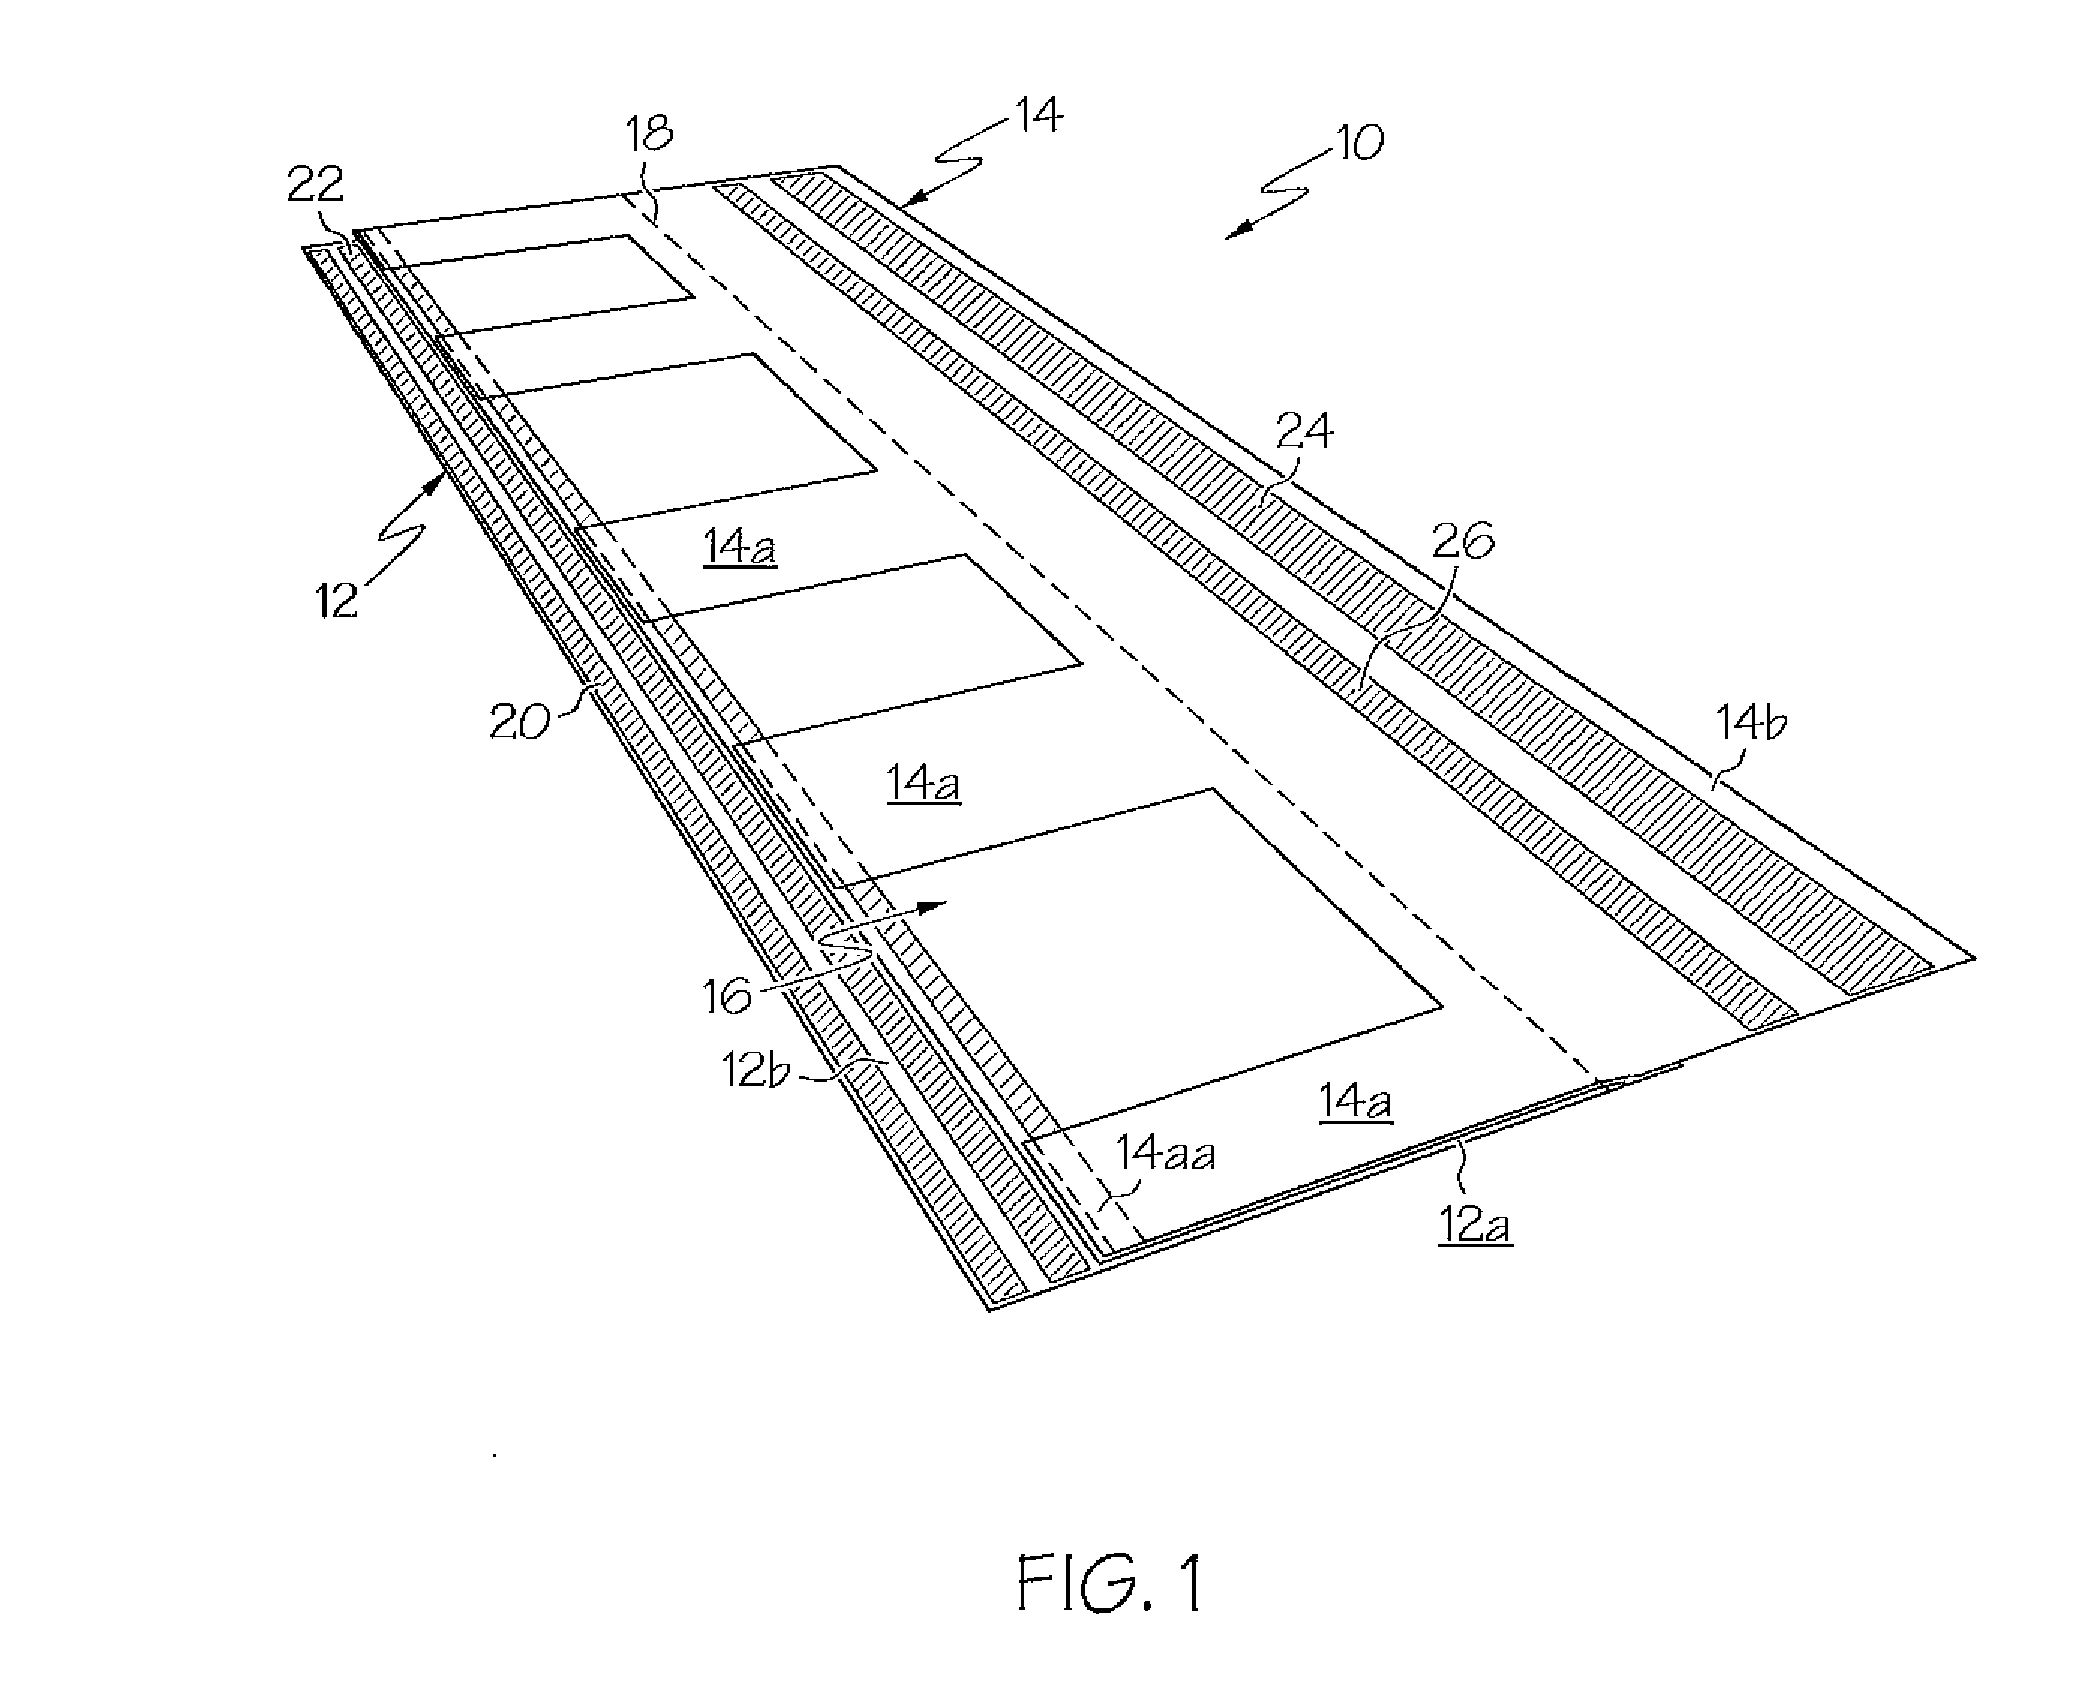 Top down trap lock shingle system for roofs